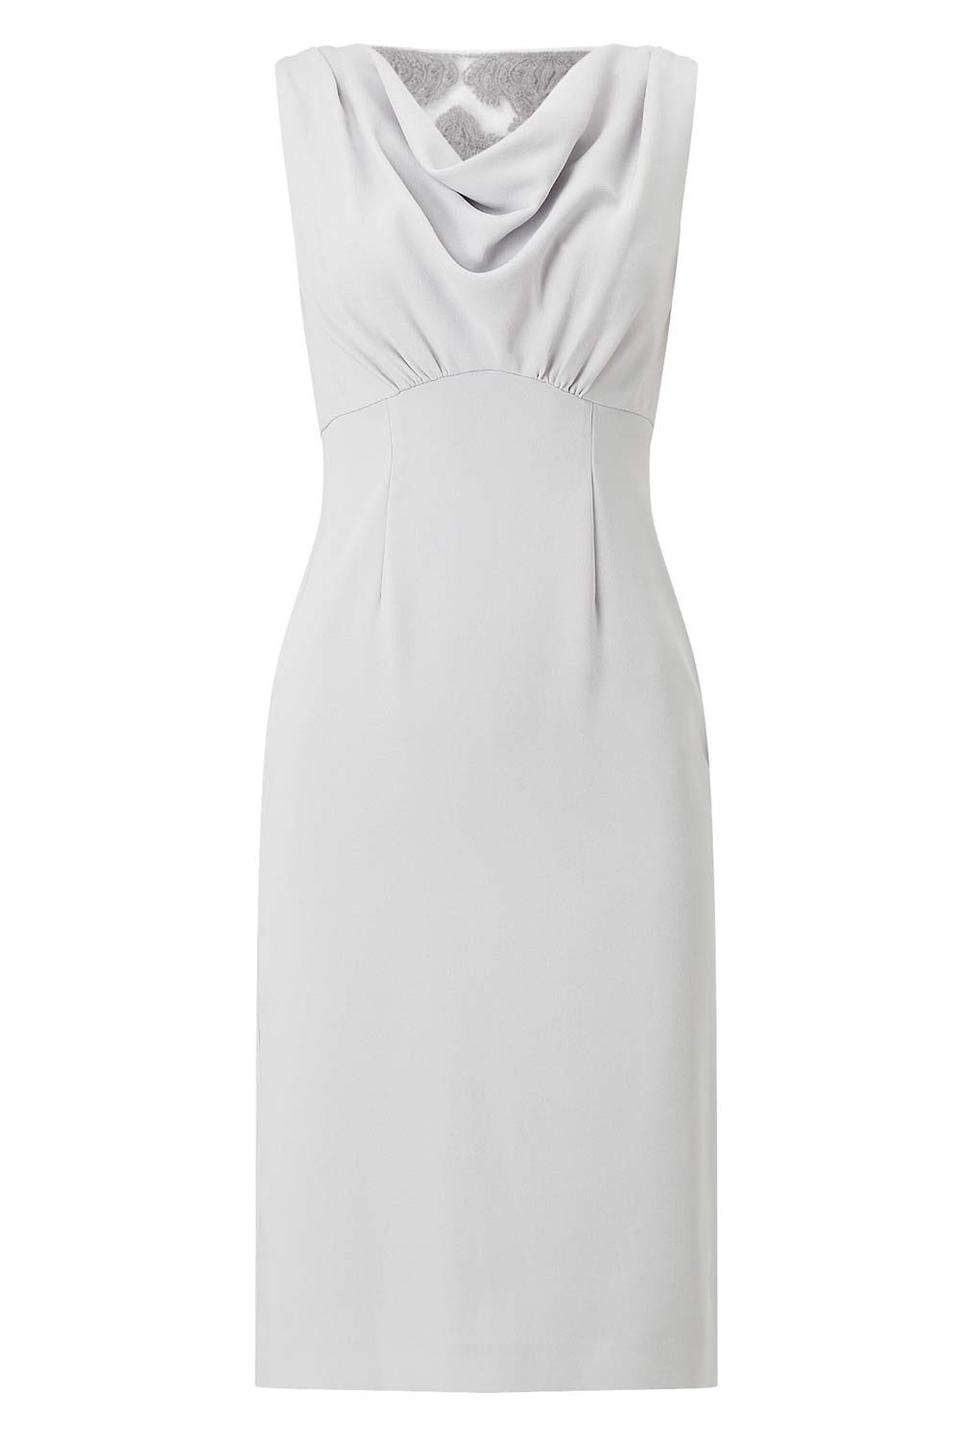 Grey Bridesmaid Dresses - hitched.co.uk - hitched.co.uk